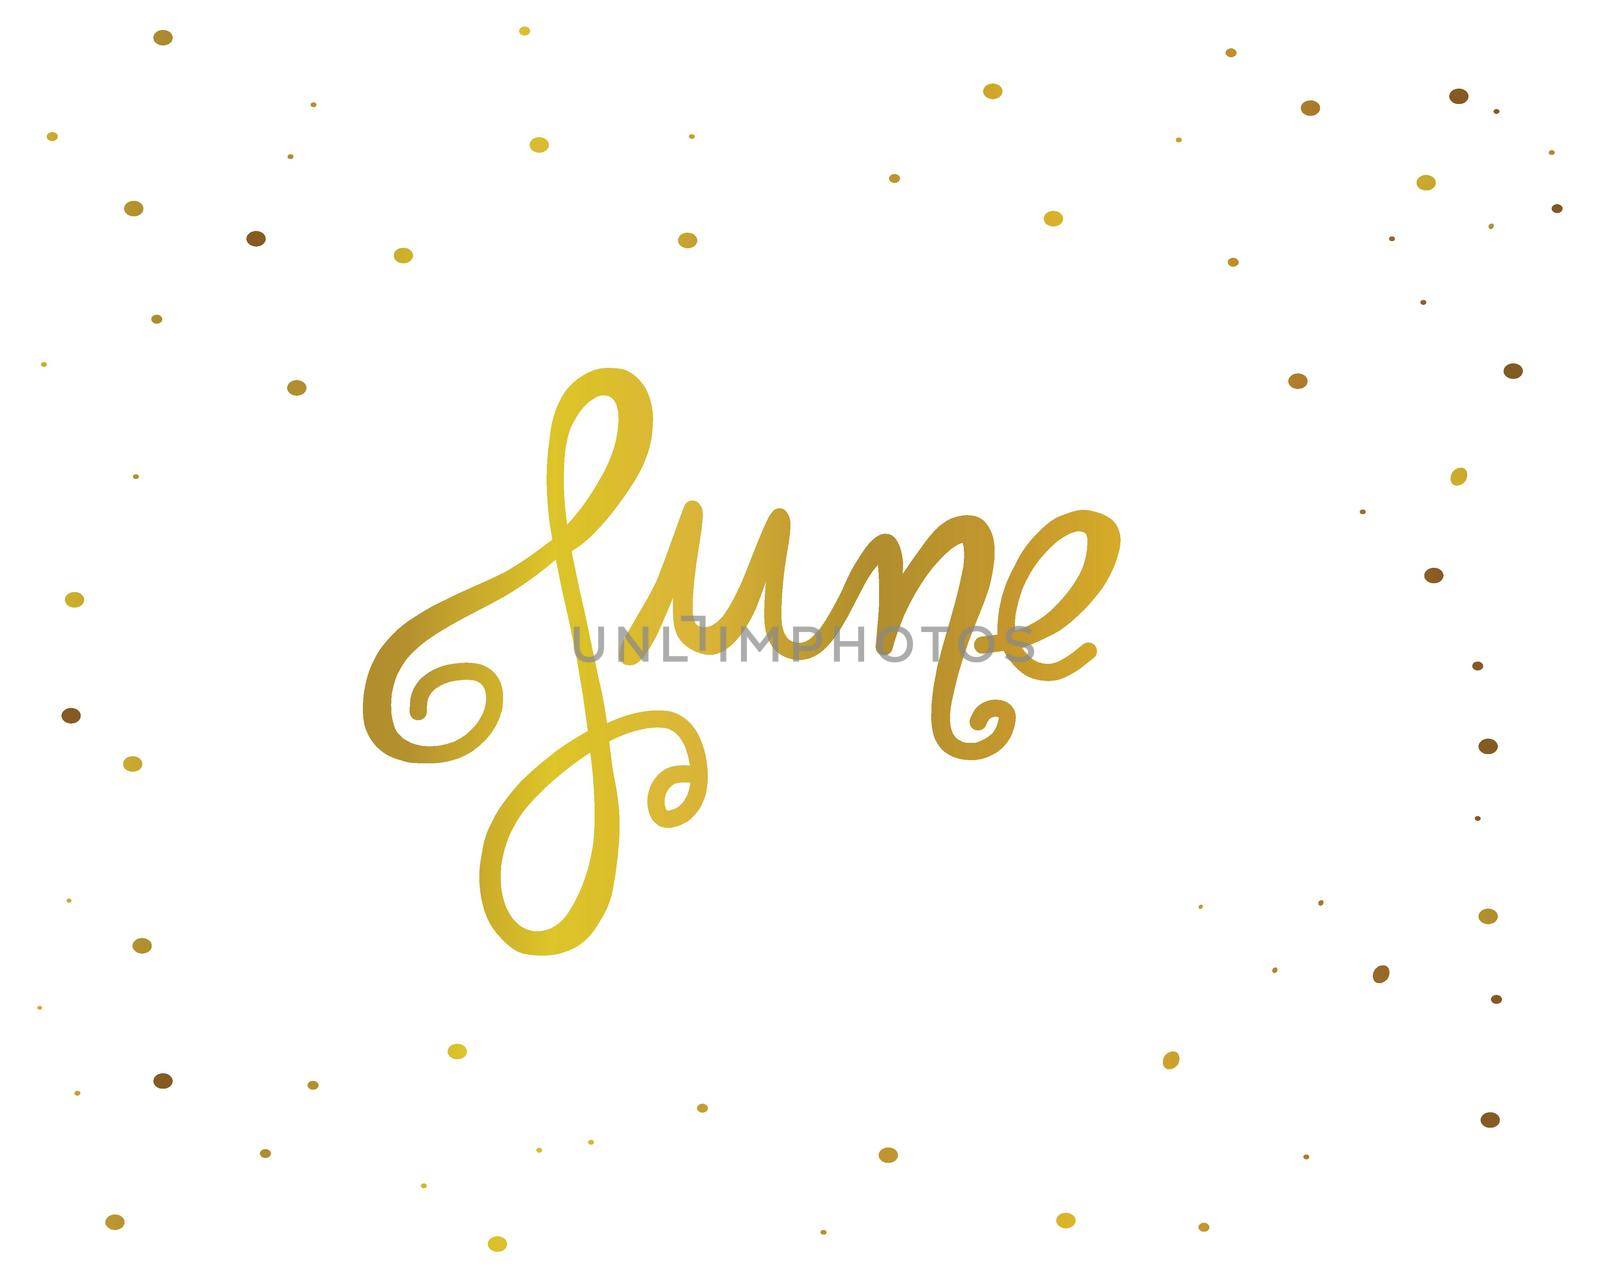 June handwriting lettering gold color vector illustration by Yoopho